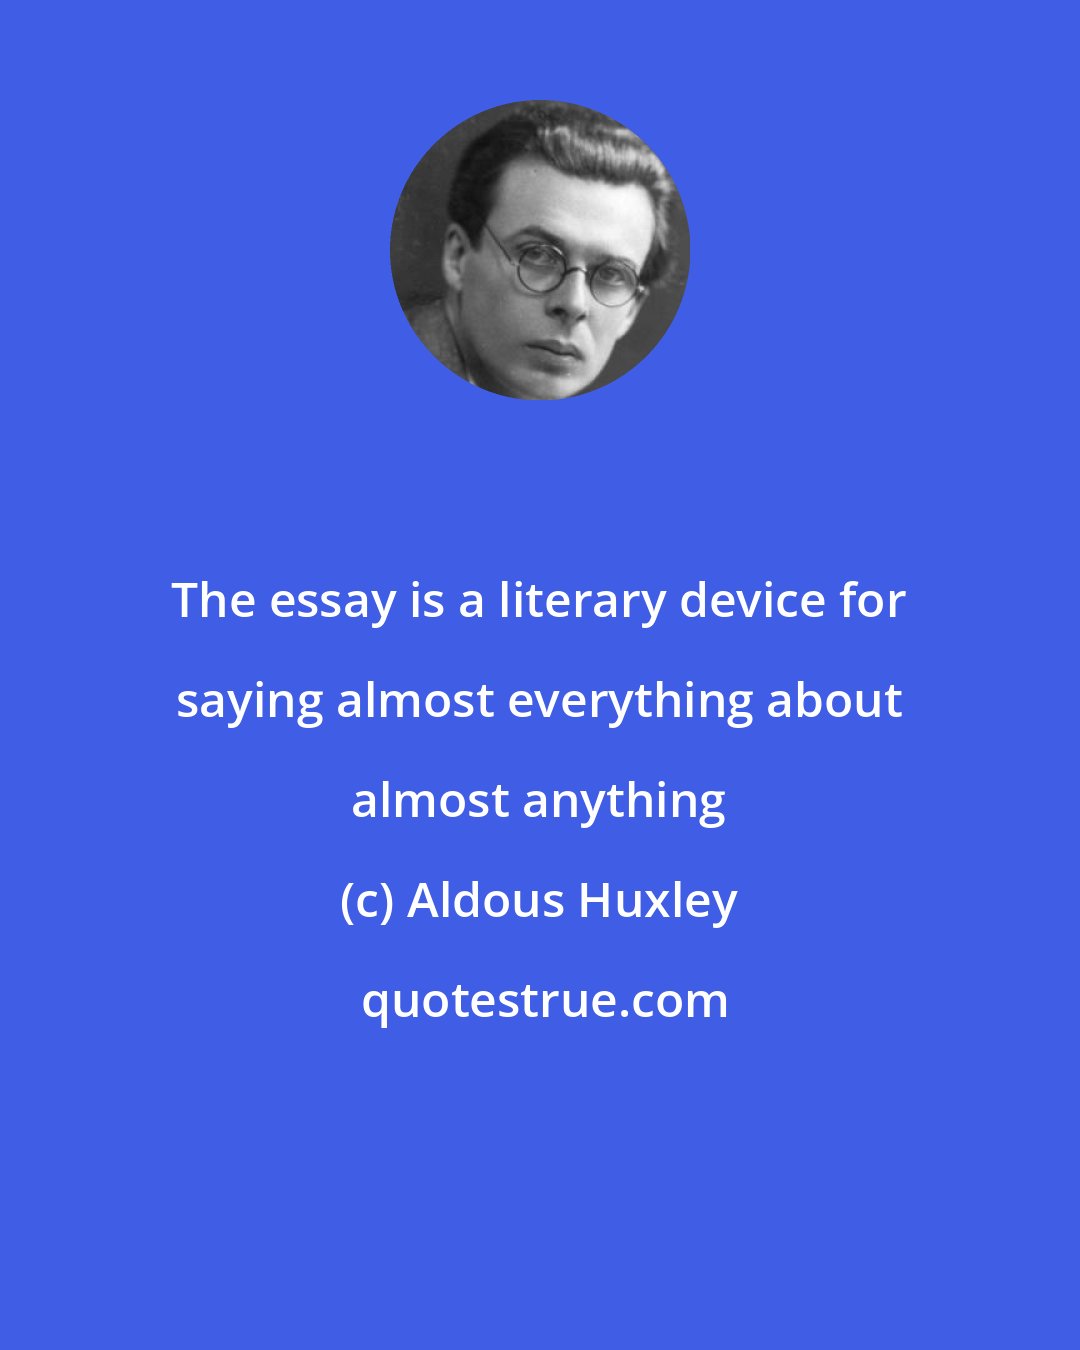 Aldous Huxley: The essay is a literary device for saying almost everything about almost anything